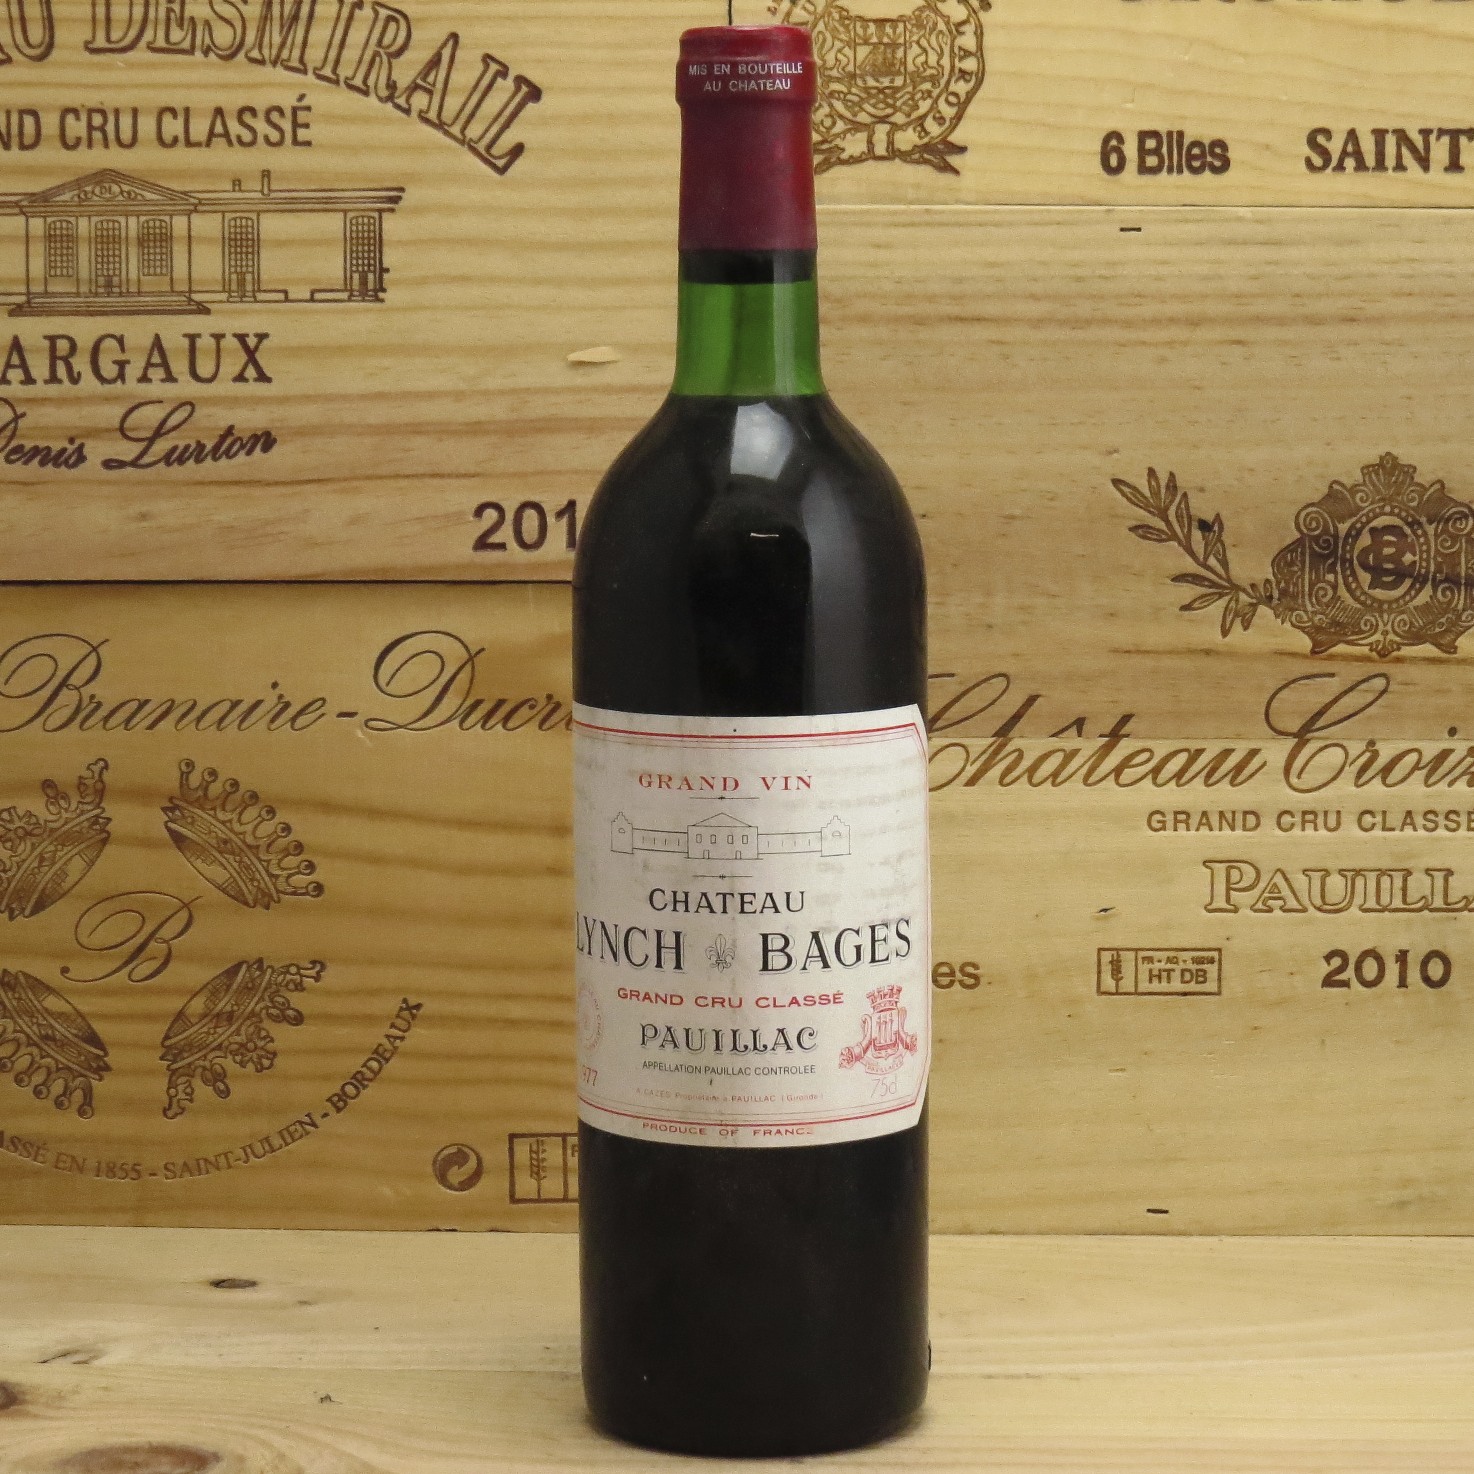 1977 Chateau Lynch Bages